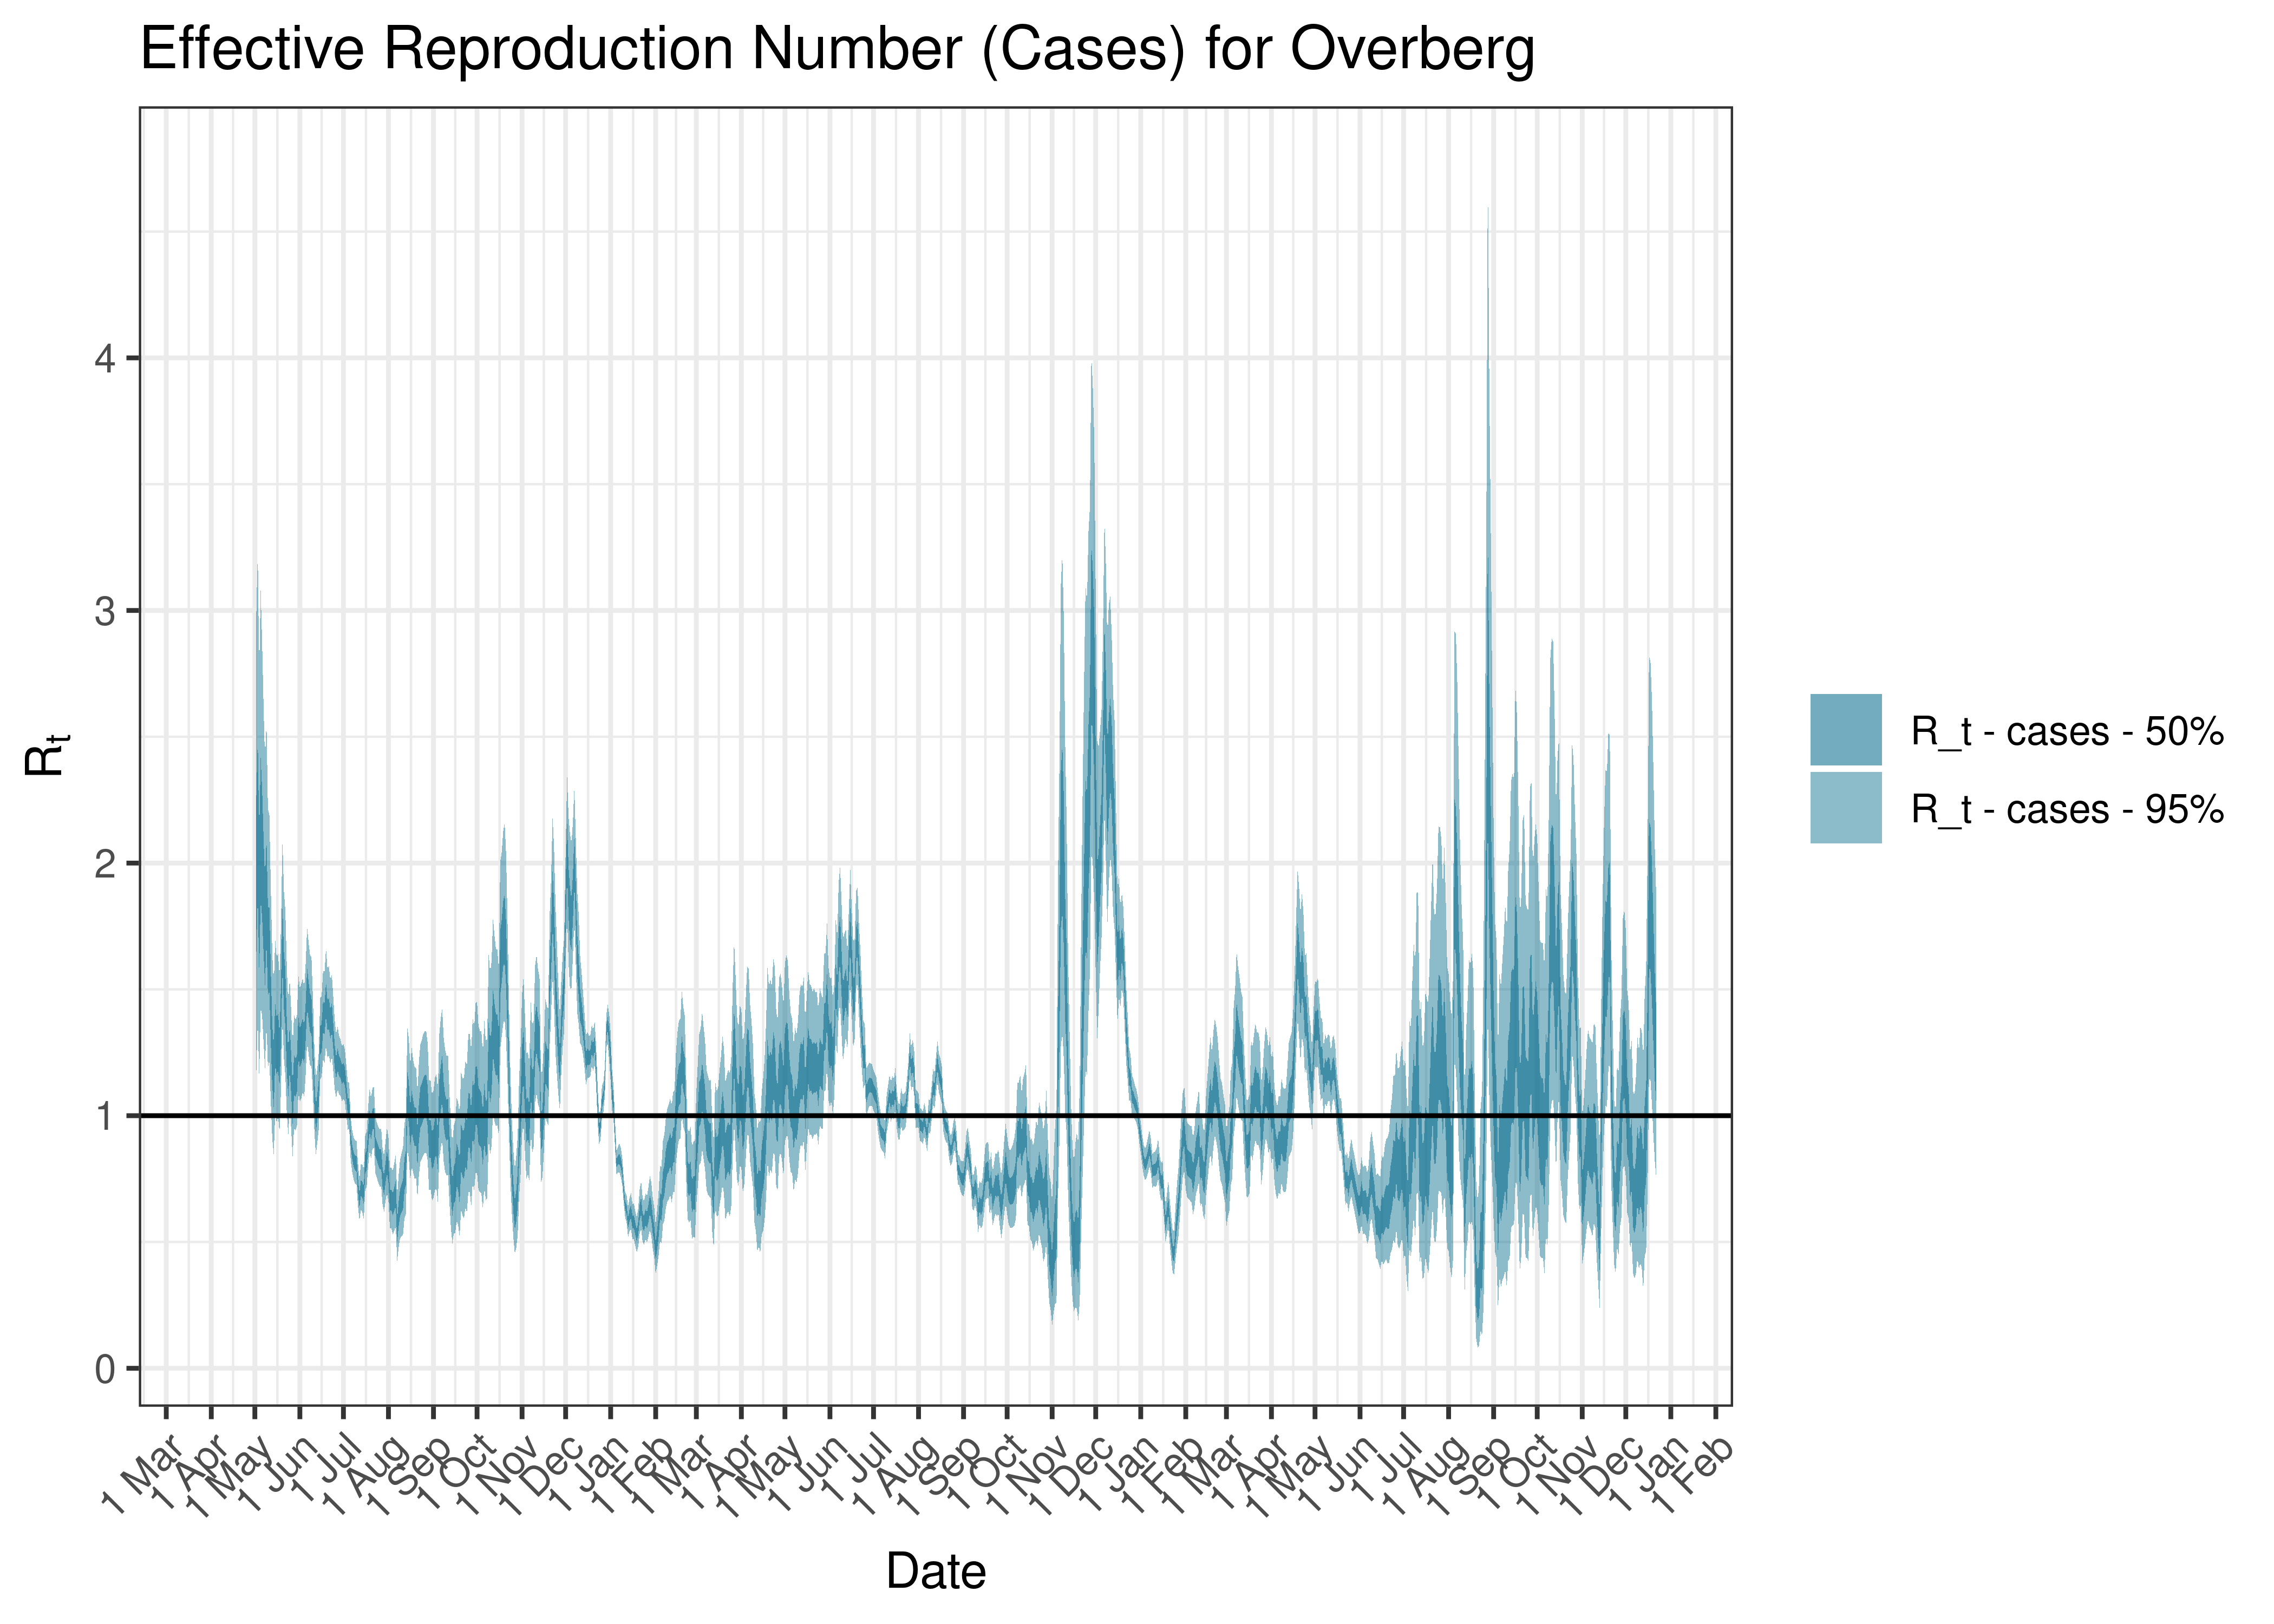 Estimated Effective Reproduction Number Based on Cases for Overberg since 1 April 2020